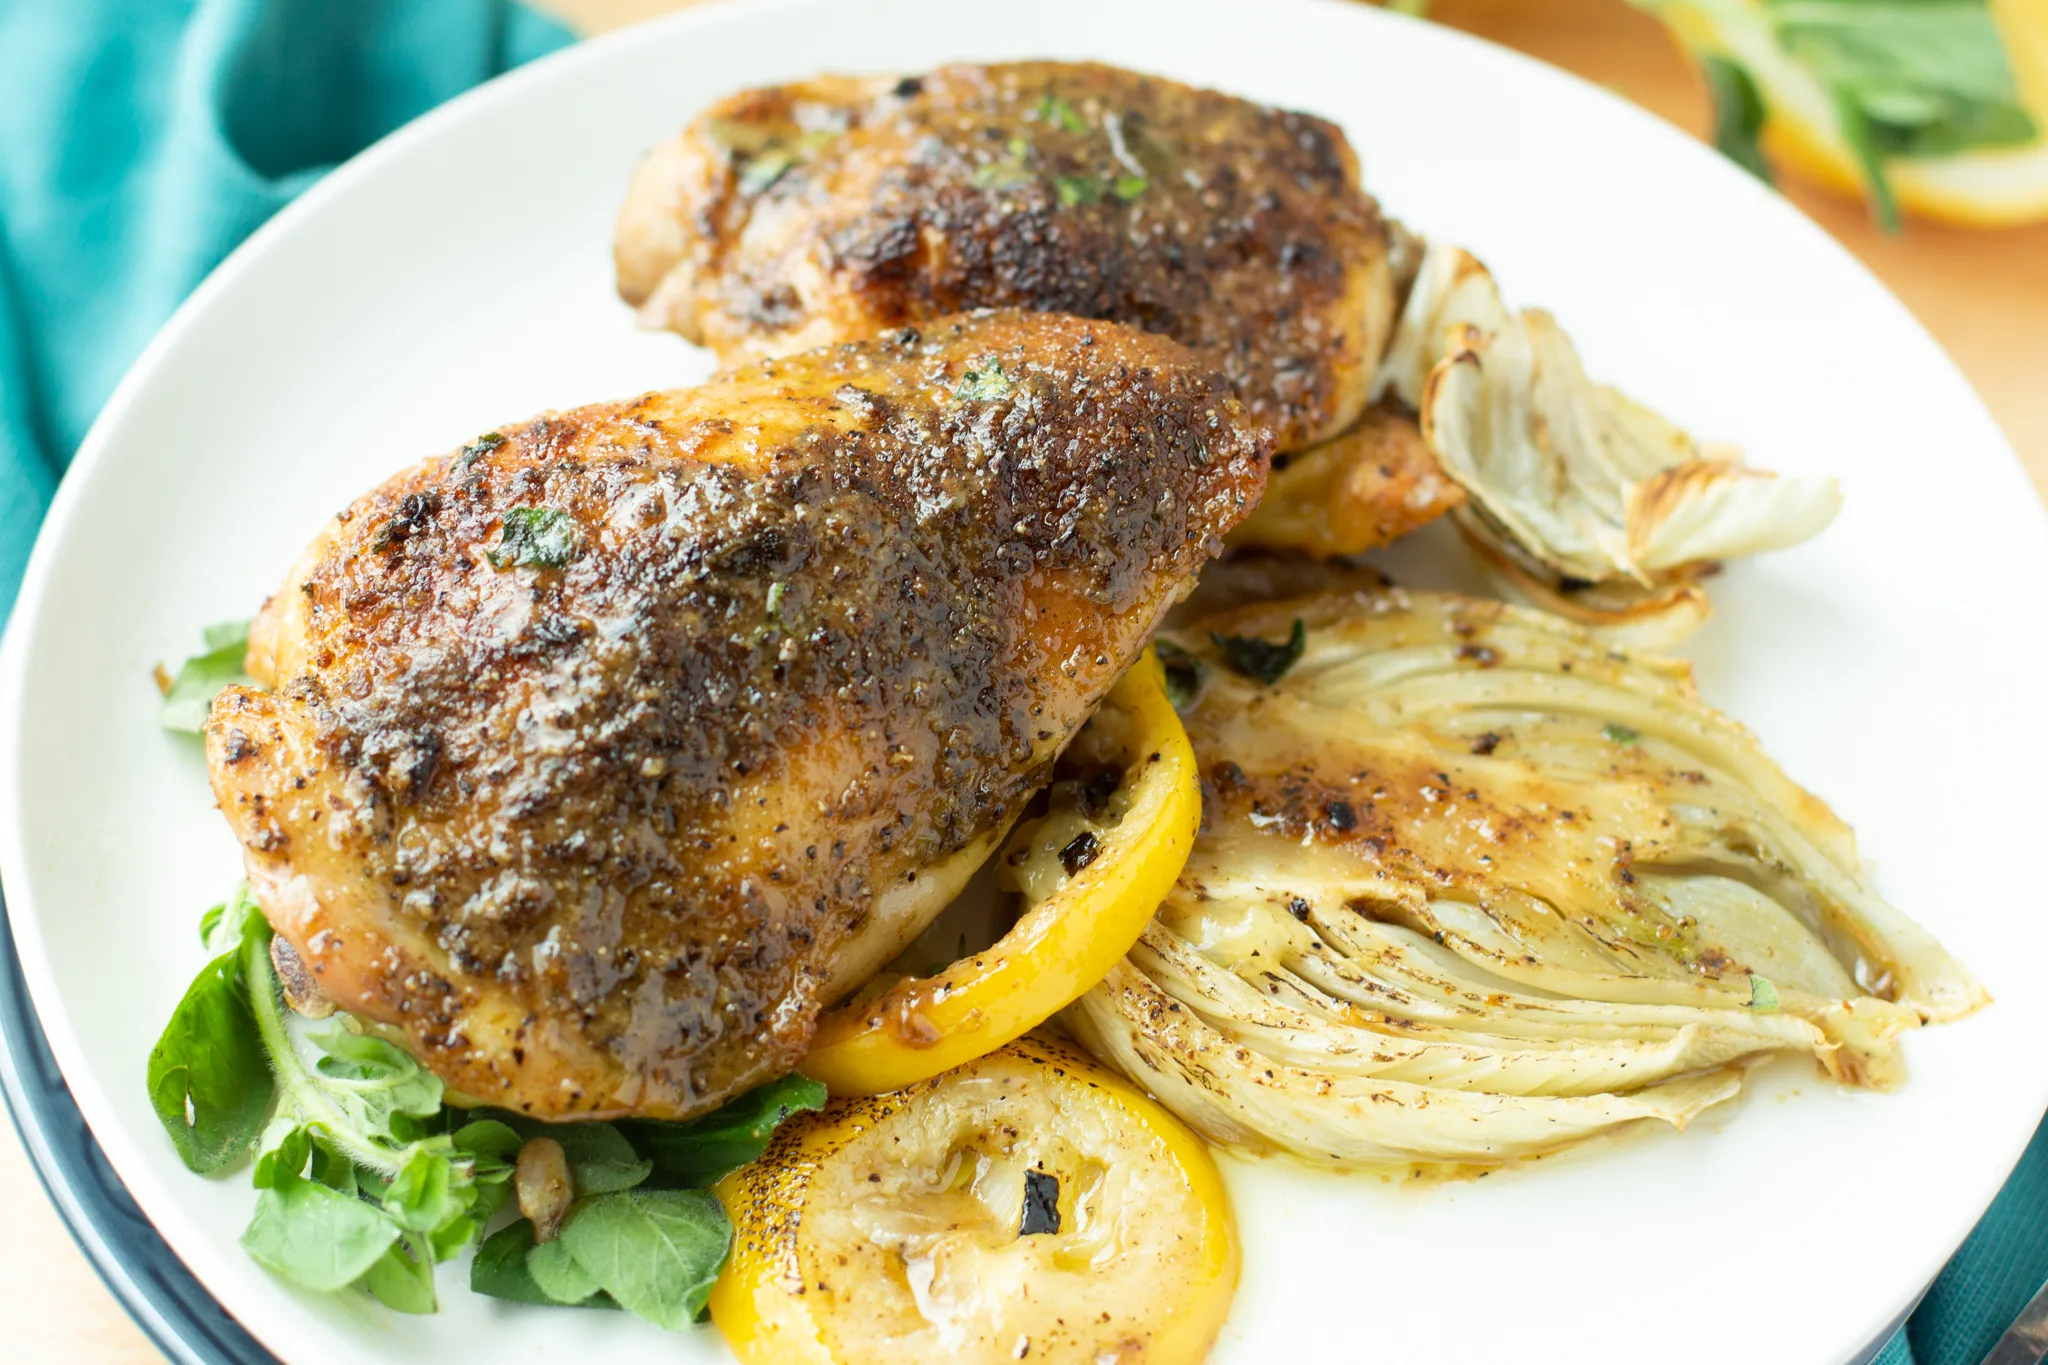 A photo of roasted chicken thighs on a plate